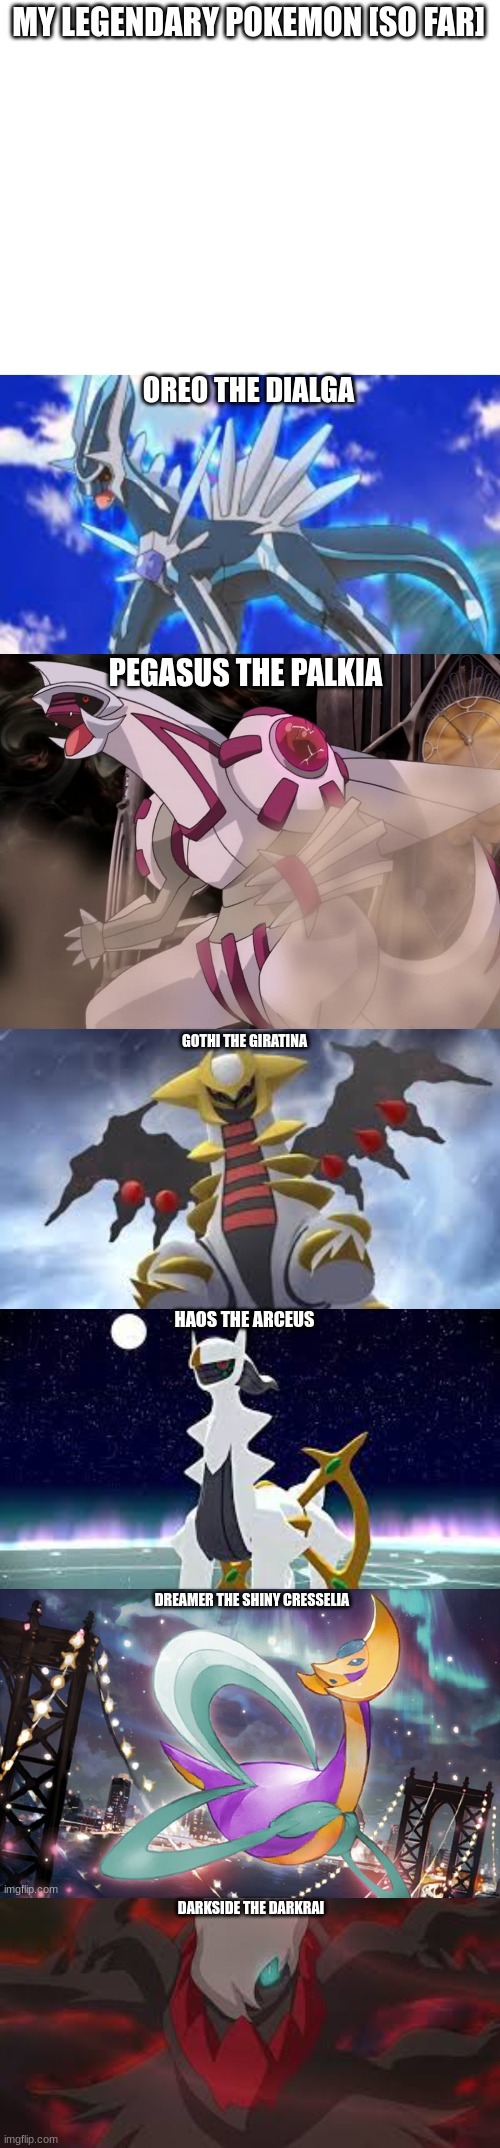 My legendary Pokemon [Updated now with Darkside the Darkrai] | DARKSIDE THE DARKRAI | image tagged in my legendary pokemon,legendary pokemon,pokemon,darkrai | made w/ Imgflip meme maker